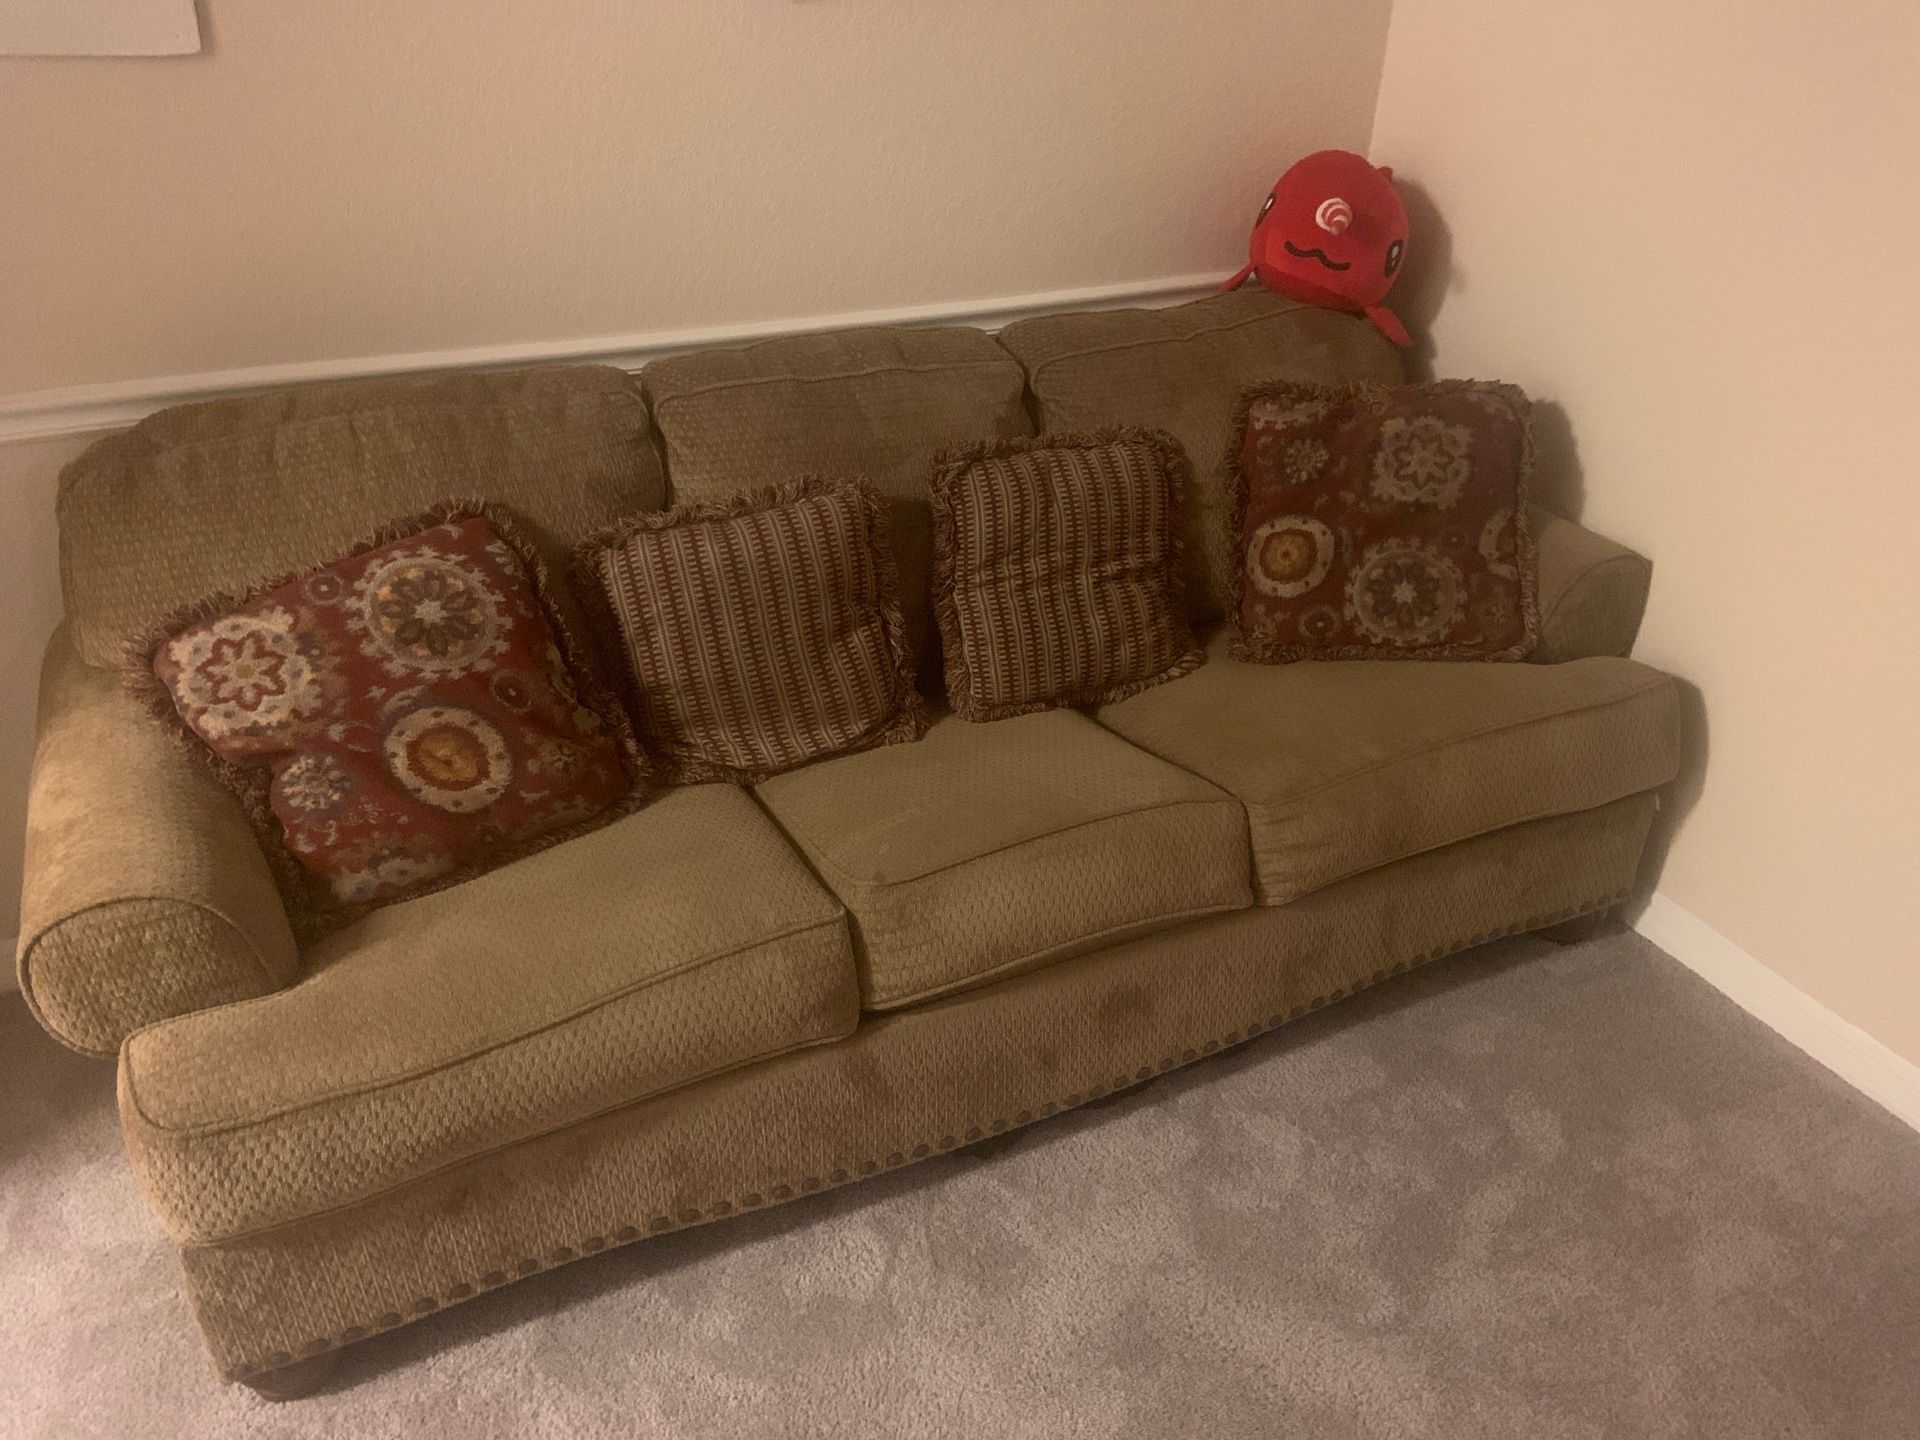 Couch loveseat an sofa great Deal You must have a way to pick up